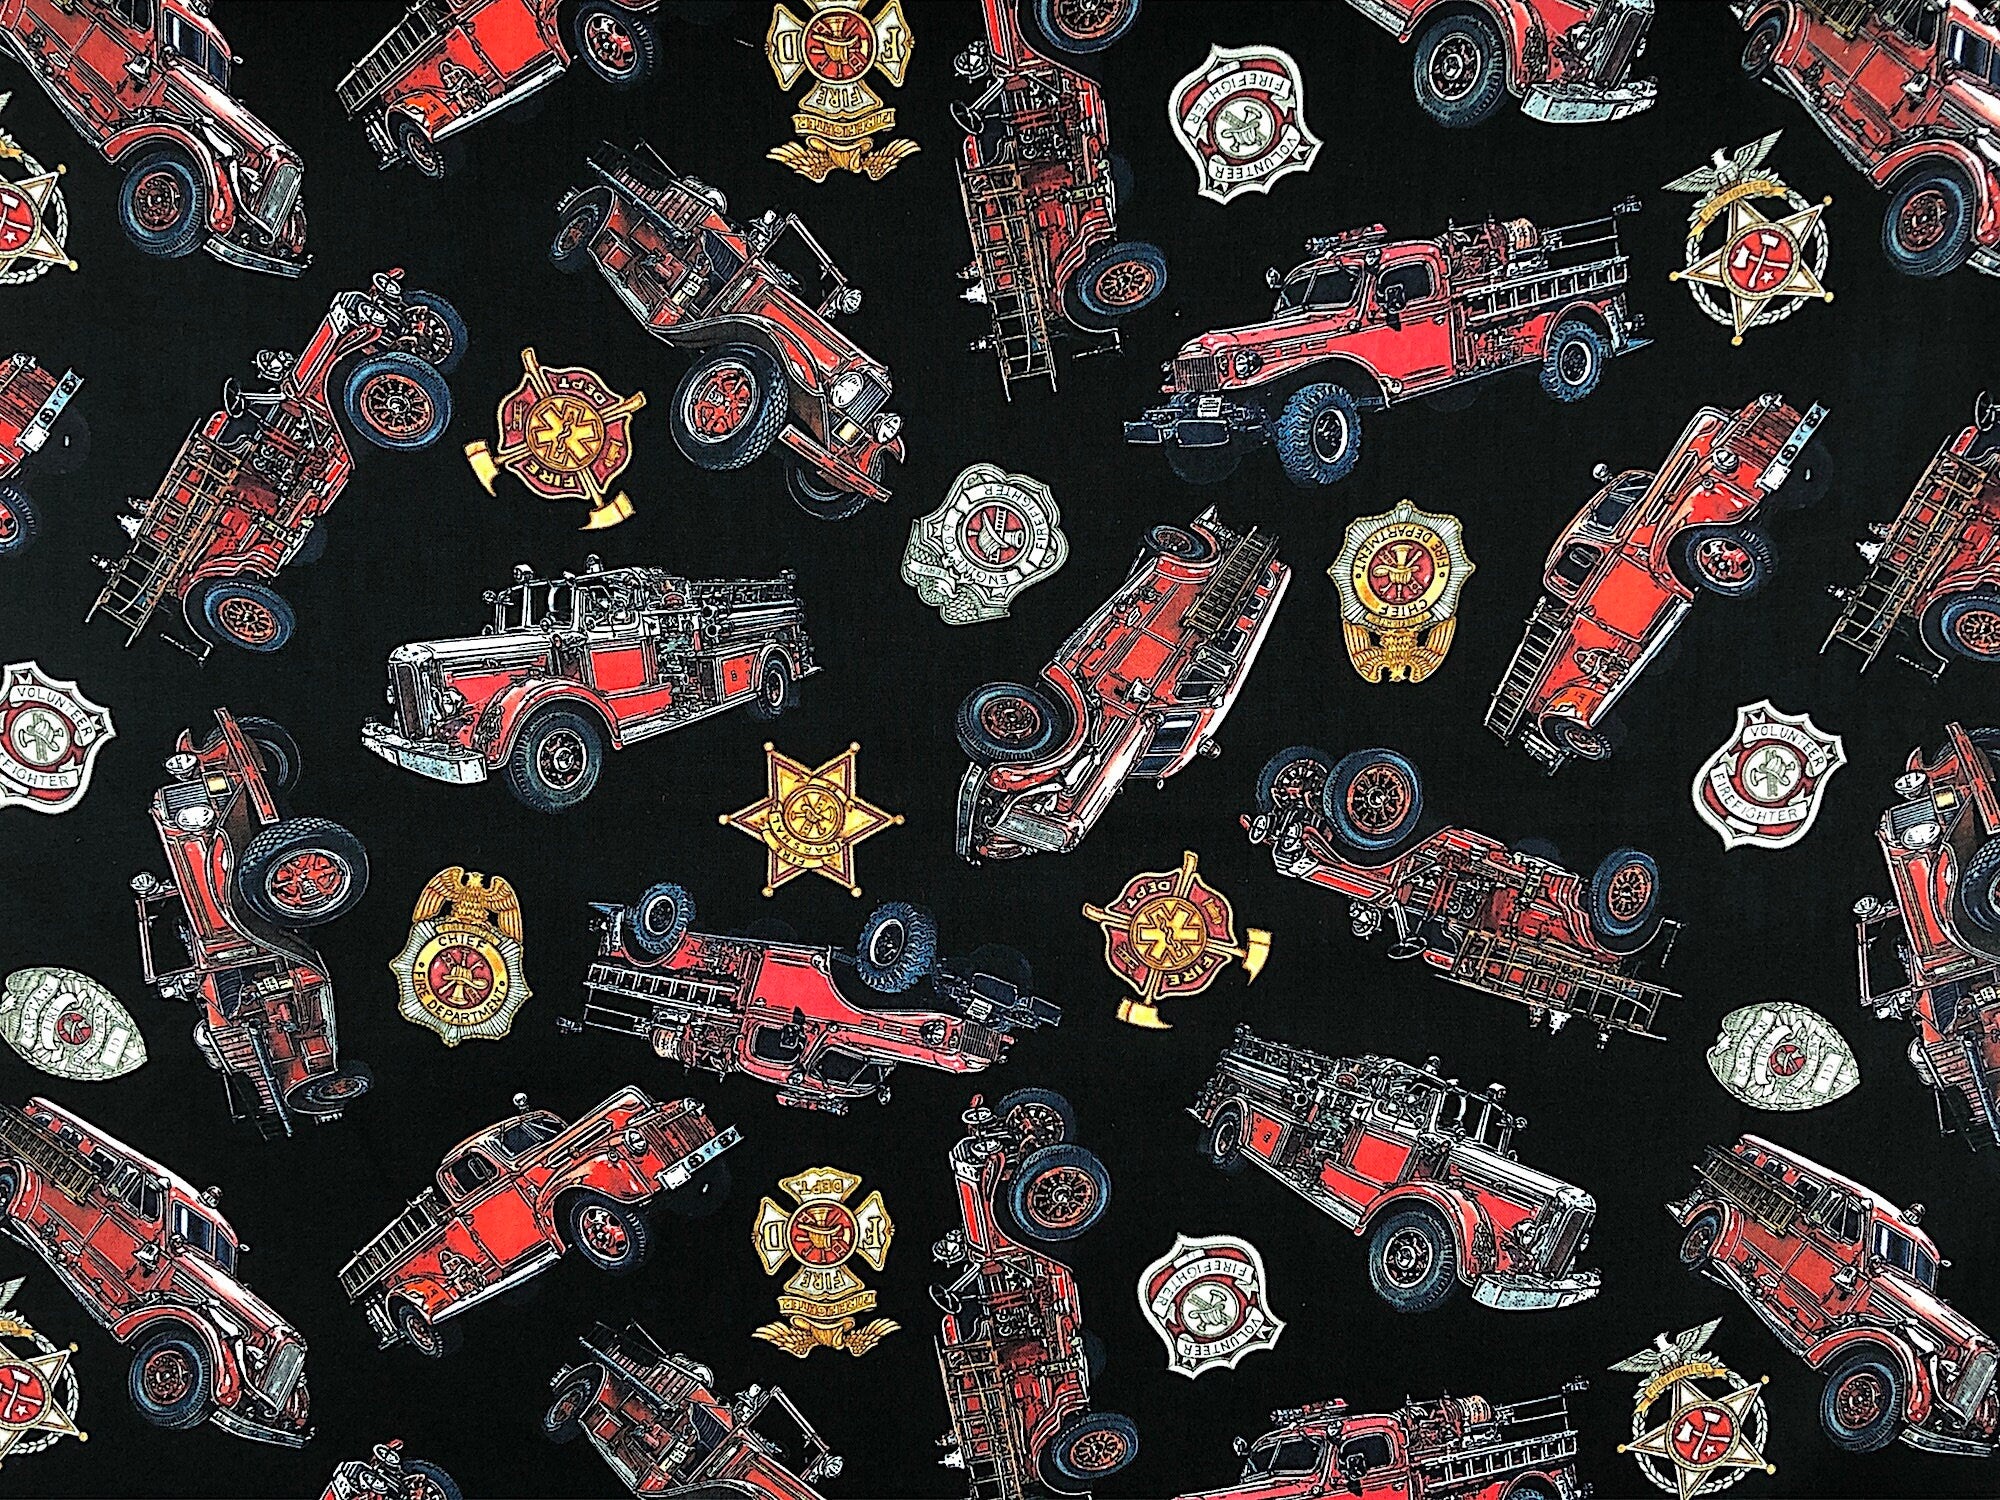 This black fabric is part of the 5 Alarm collection and is covered with firetrucks and shields.